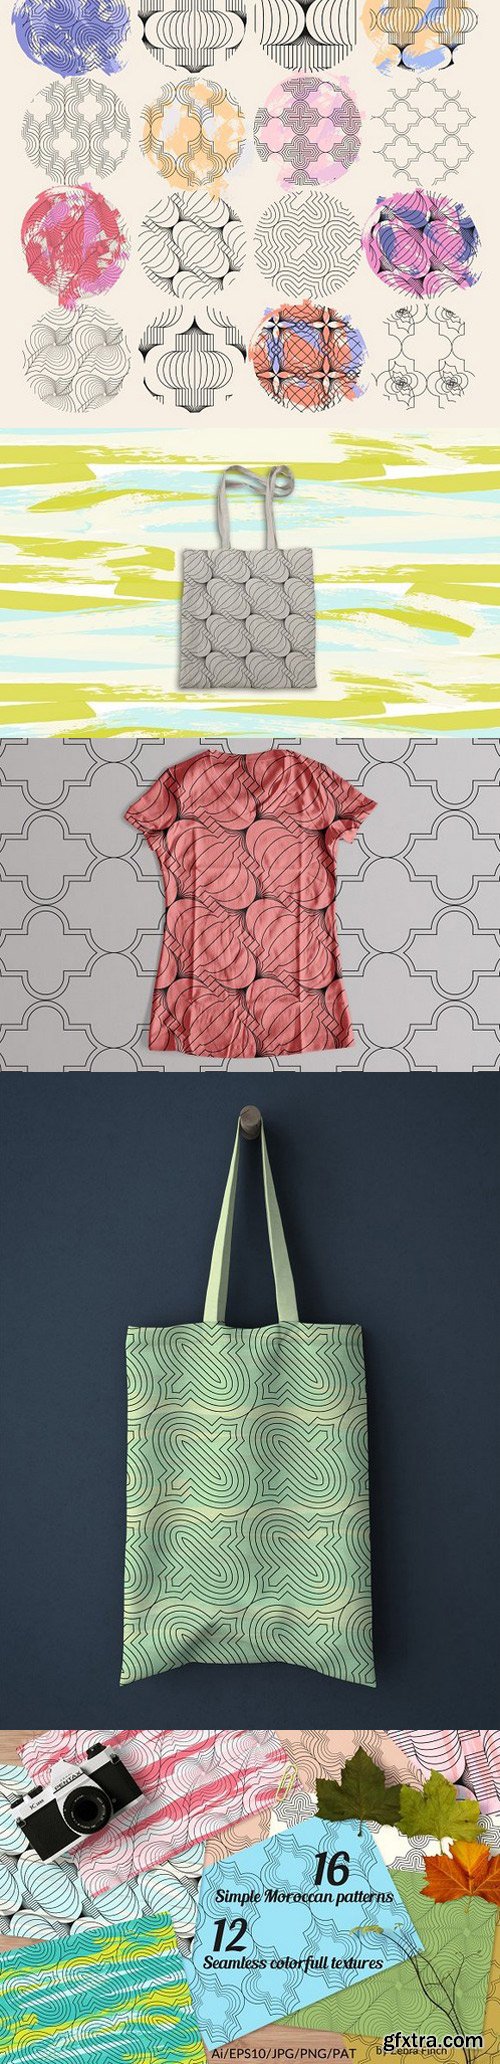 CM - Simple Moroccan patterns+textures 1227798